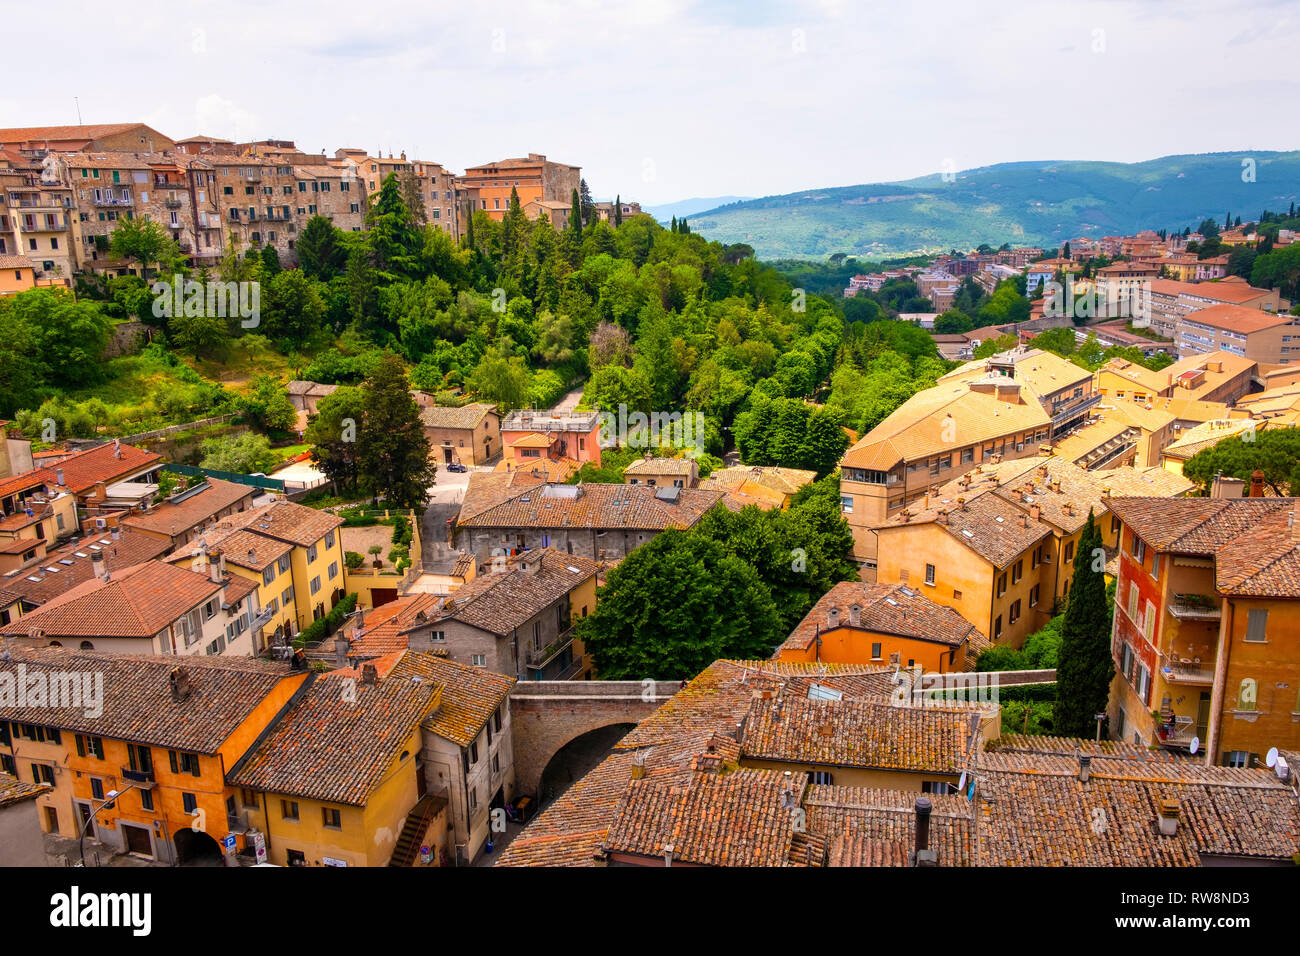 Perugia, Umbria / Italy - 2018/05/28: Panoramic view of historic aqueduct forming Via dell Acquedotto pedestrian street along the ancient Via Appia Stock Photo